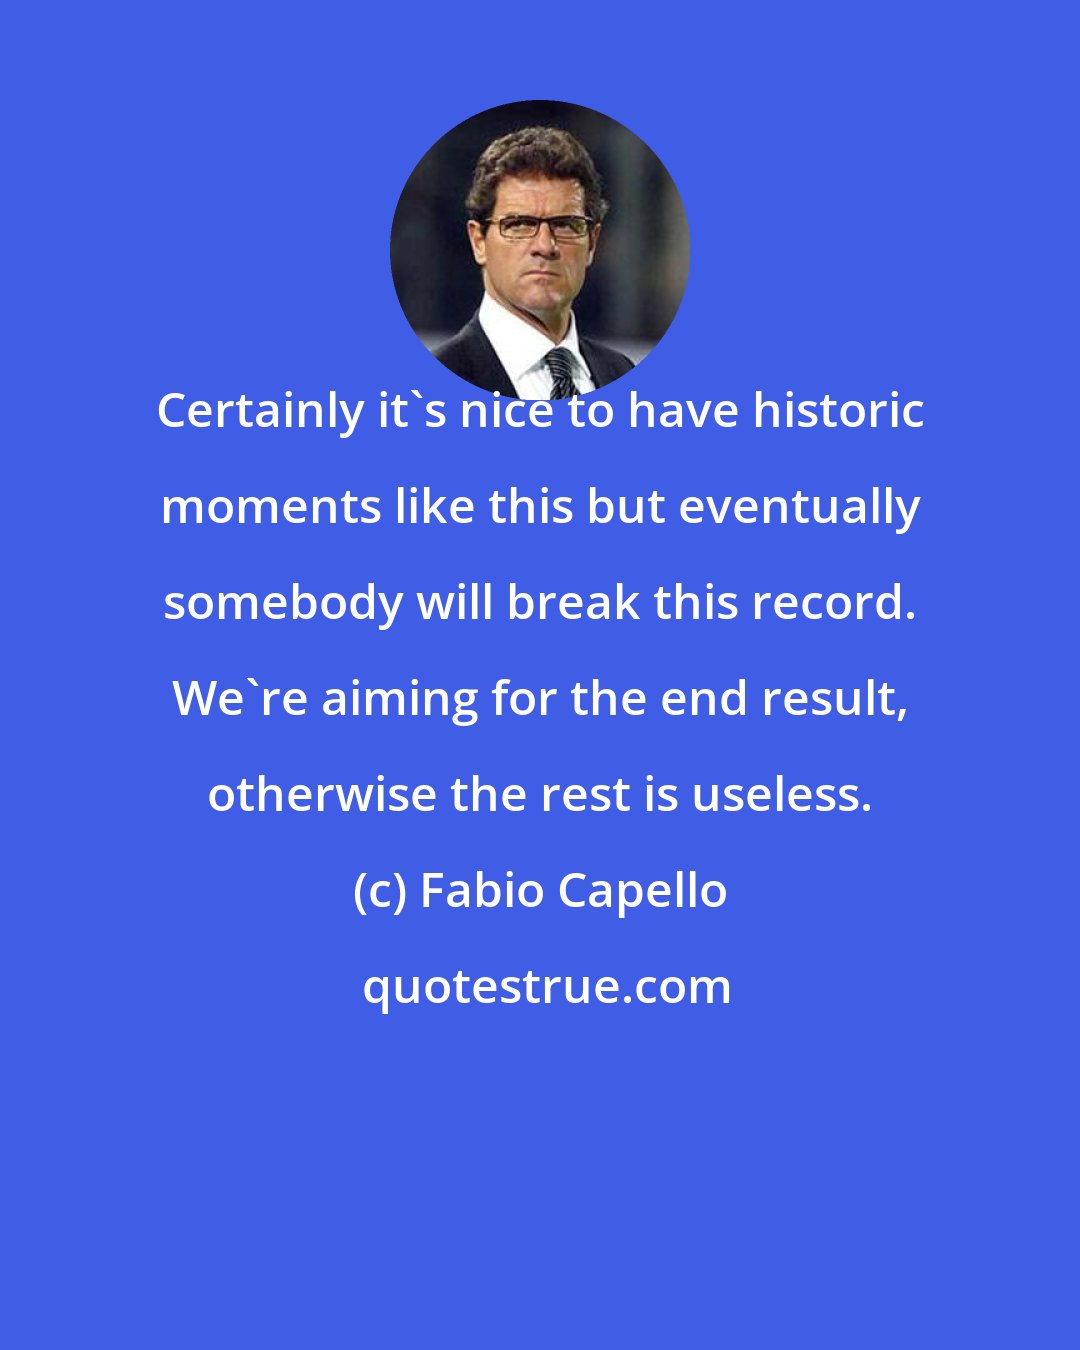 Fabio Capello: Certainly it's nice to have historic moments like this but eventually somebody will break this record. We're aiming for the end result, otherwise the rest is useless.